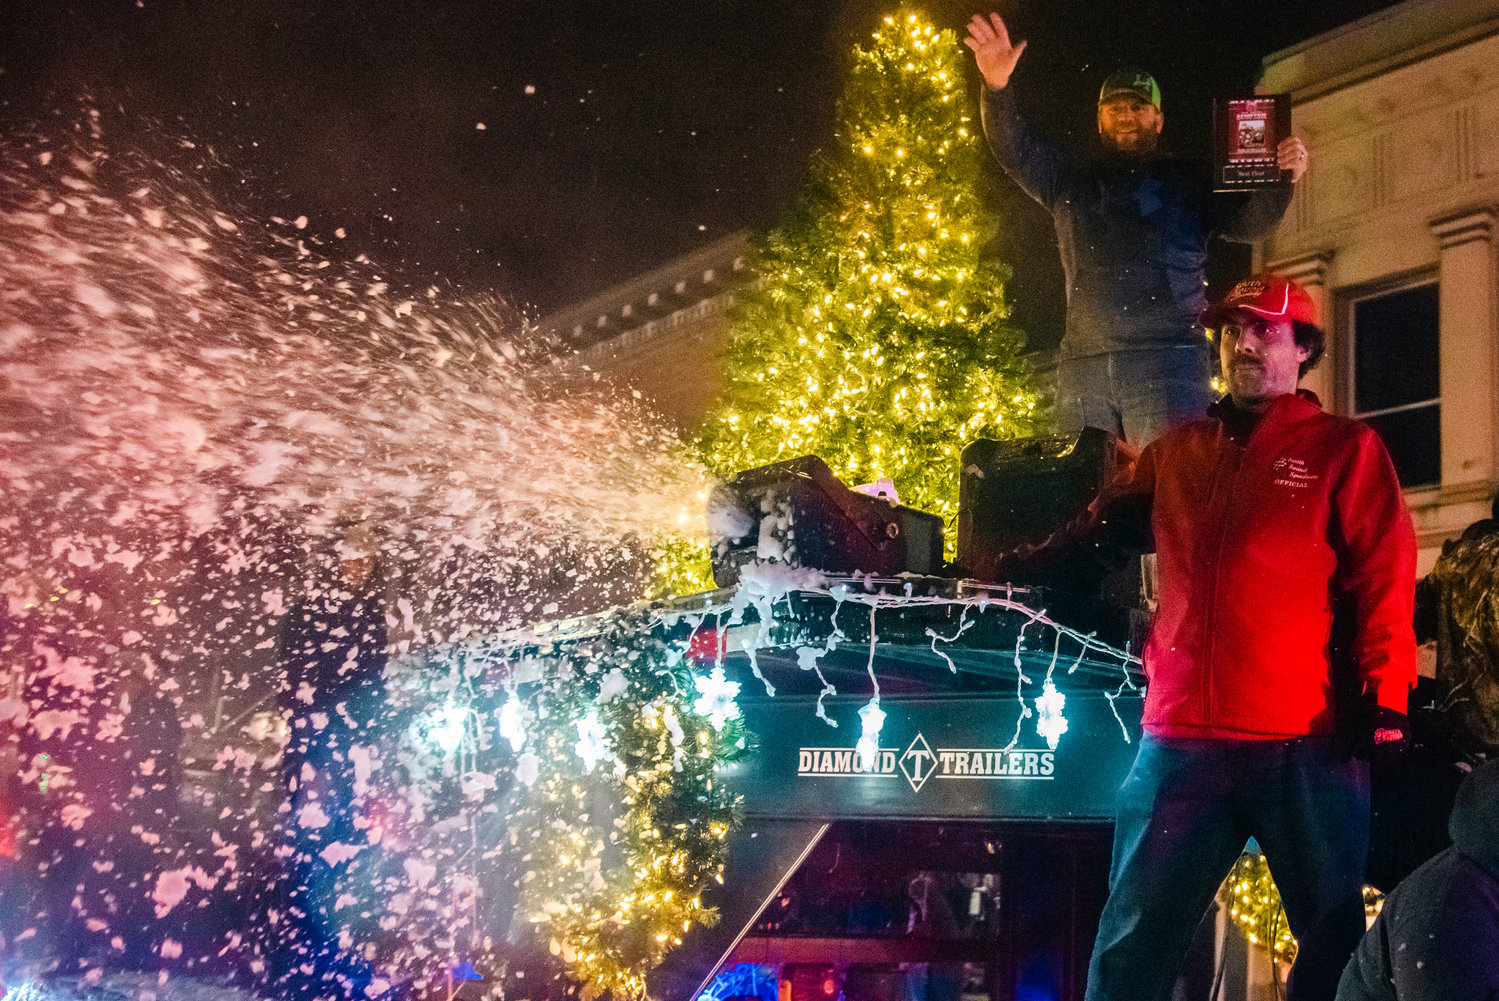 A snow machine blasts into the air from a float during the Lighted Tractor Parade in Centralia Saturday night.